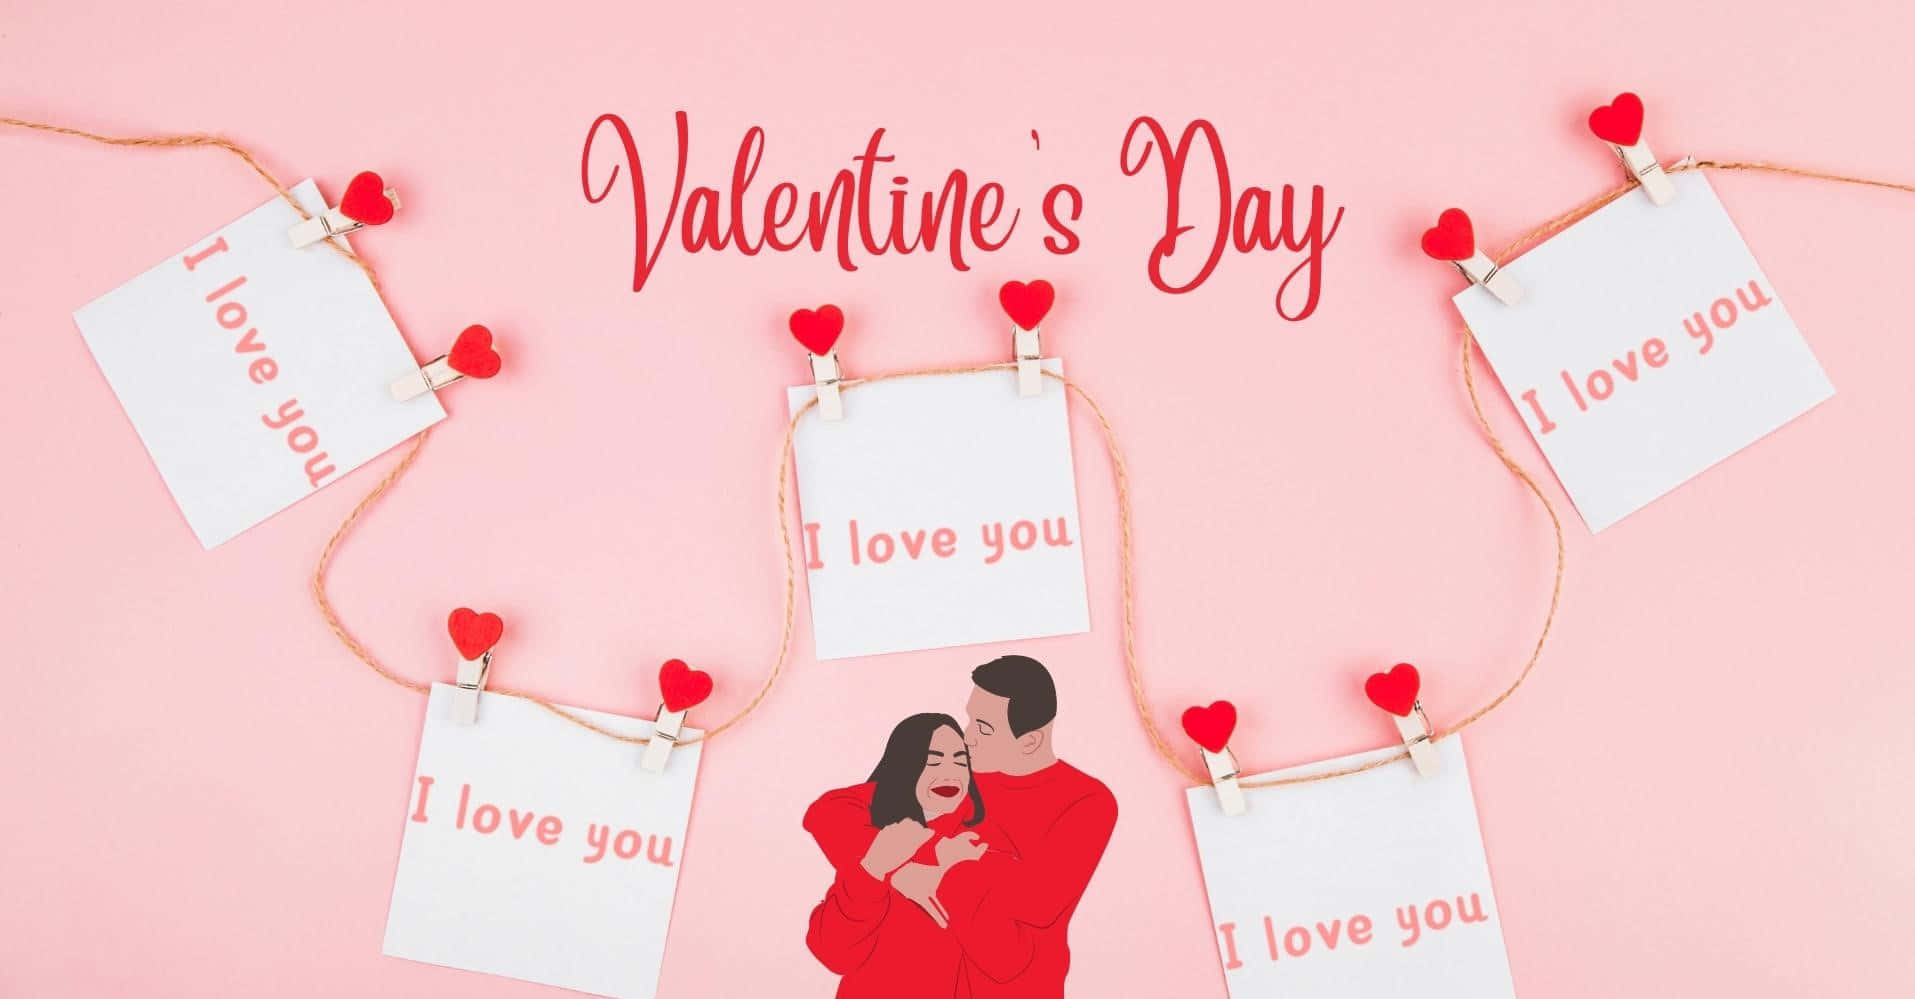 Valentine's Day Cards With Hearts And A Couple Hanging On Clothes Pegs